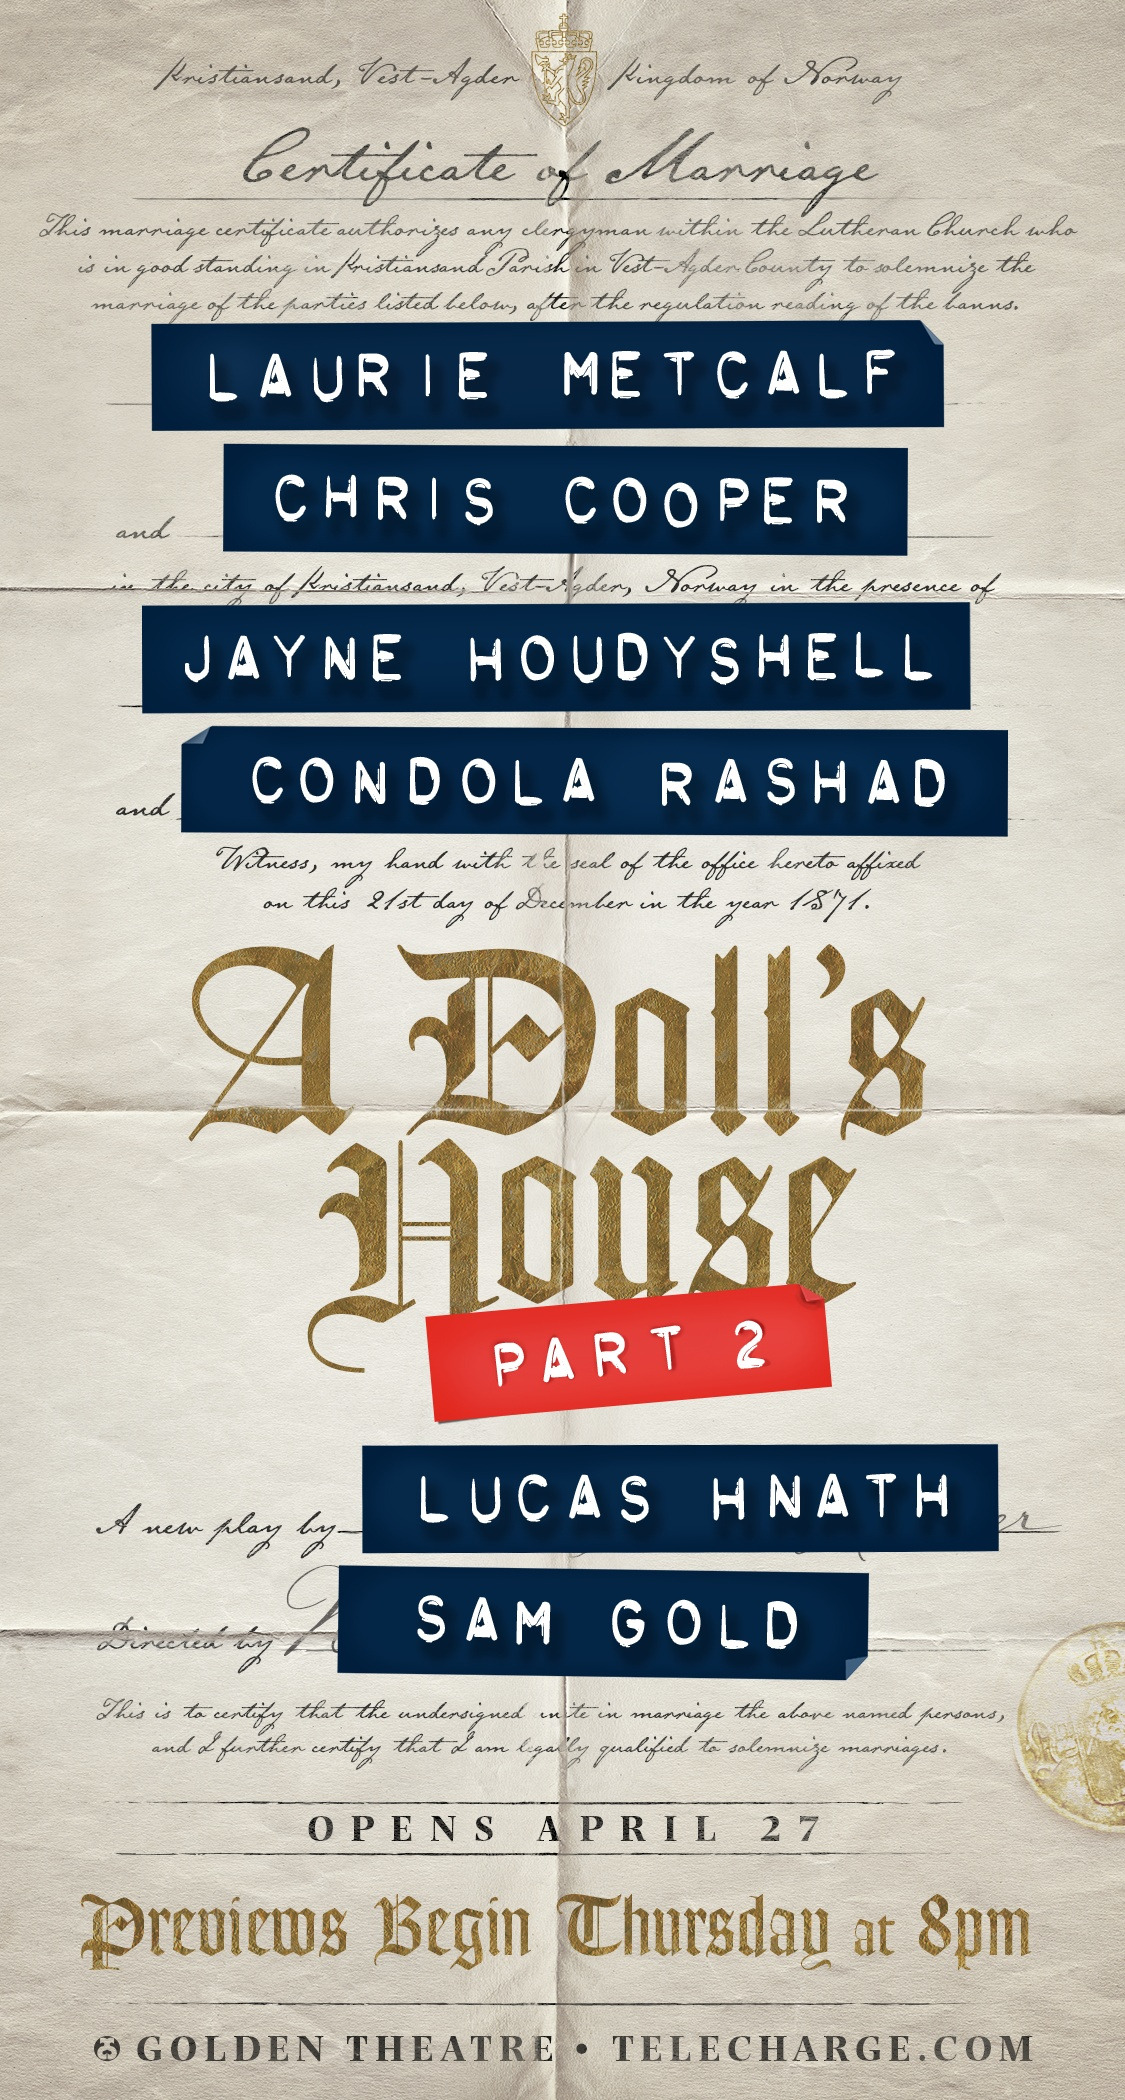 Mega Sized Broadway Poster Image for A Doll's House, Part 2 